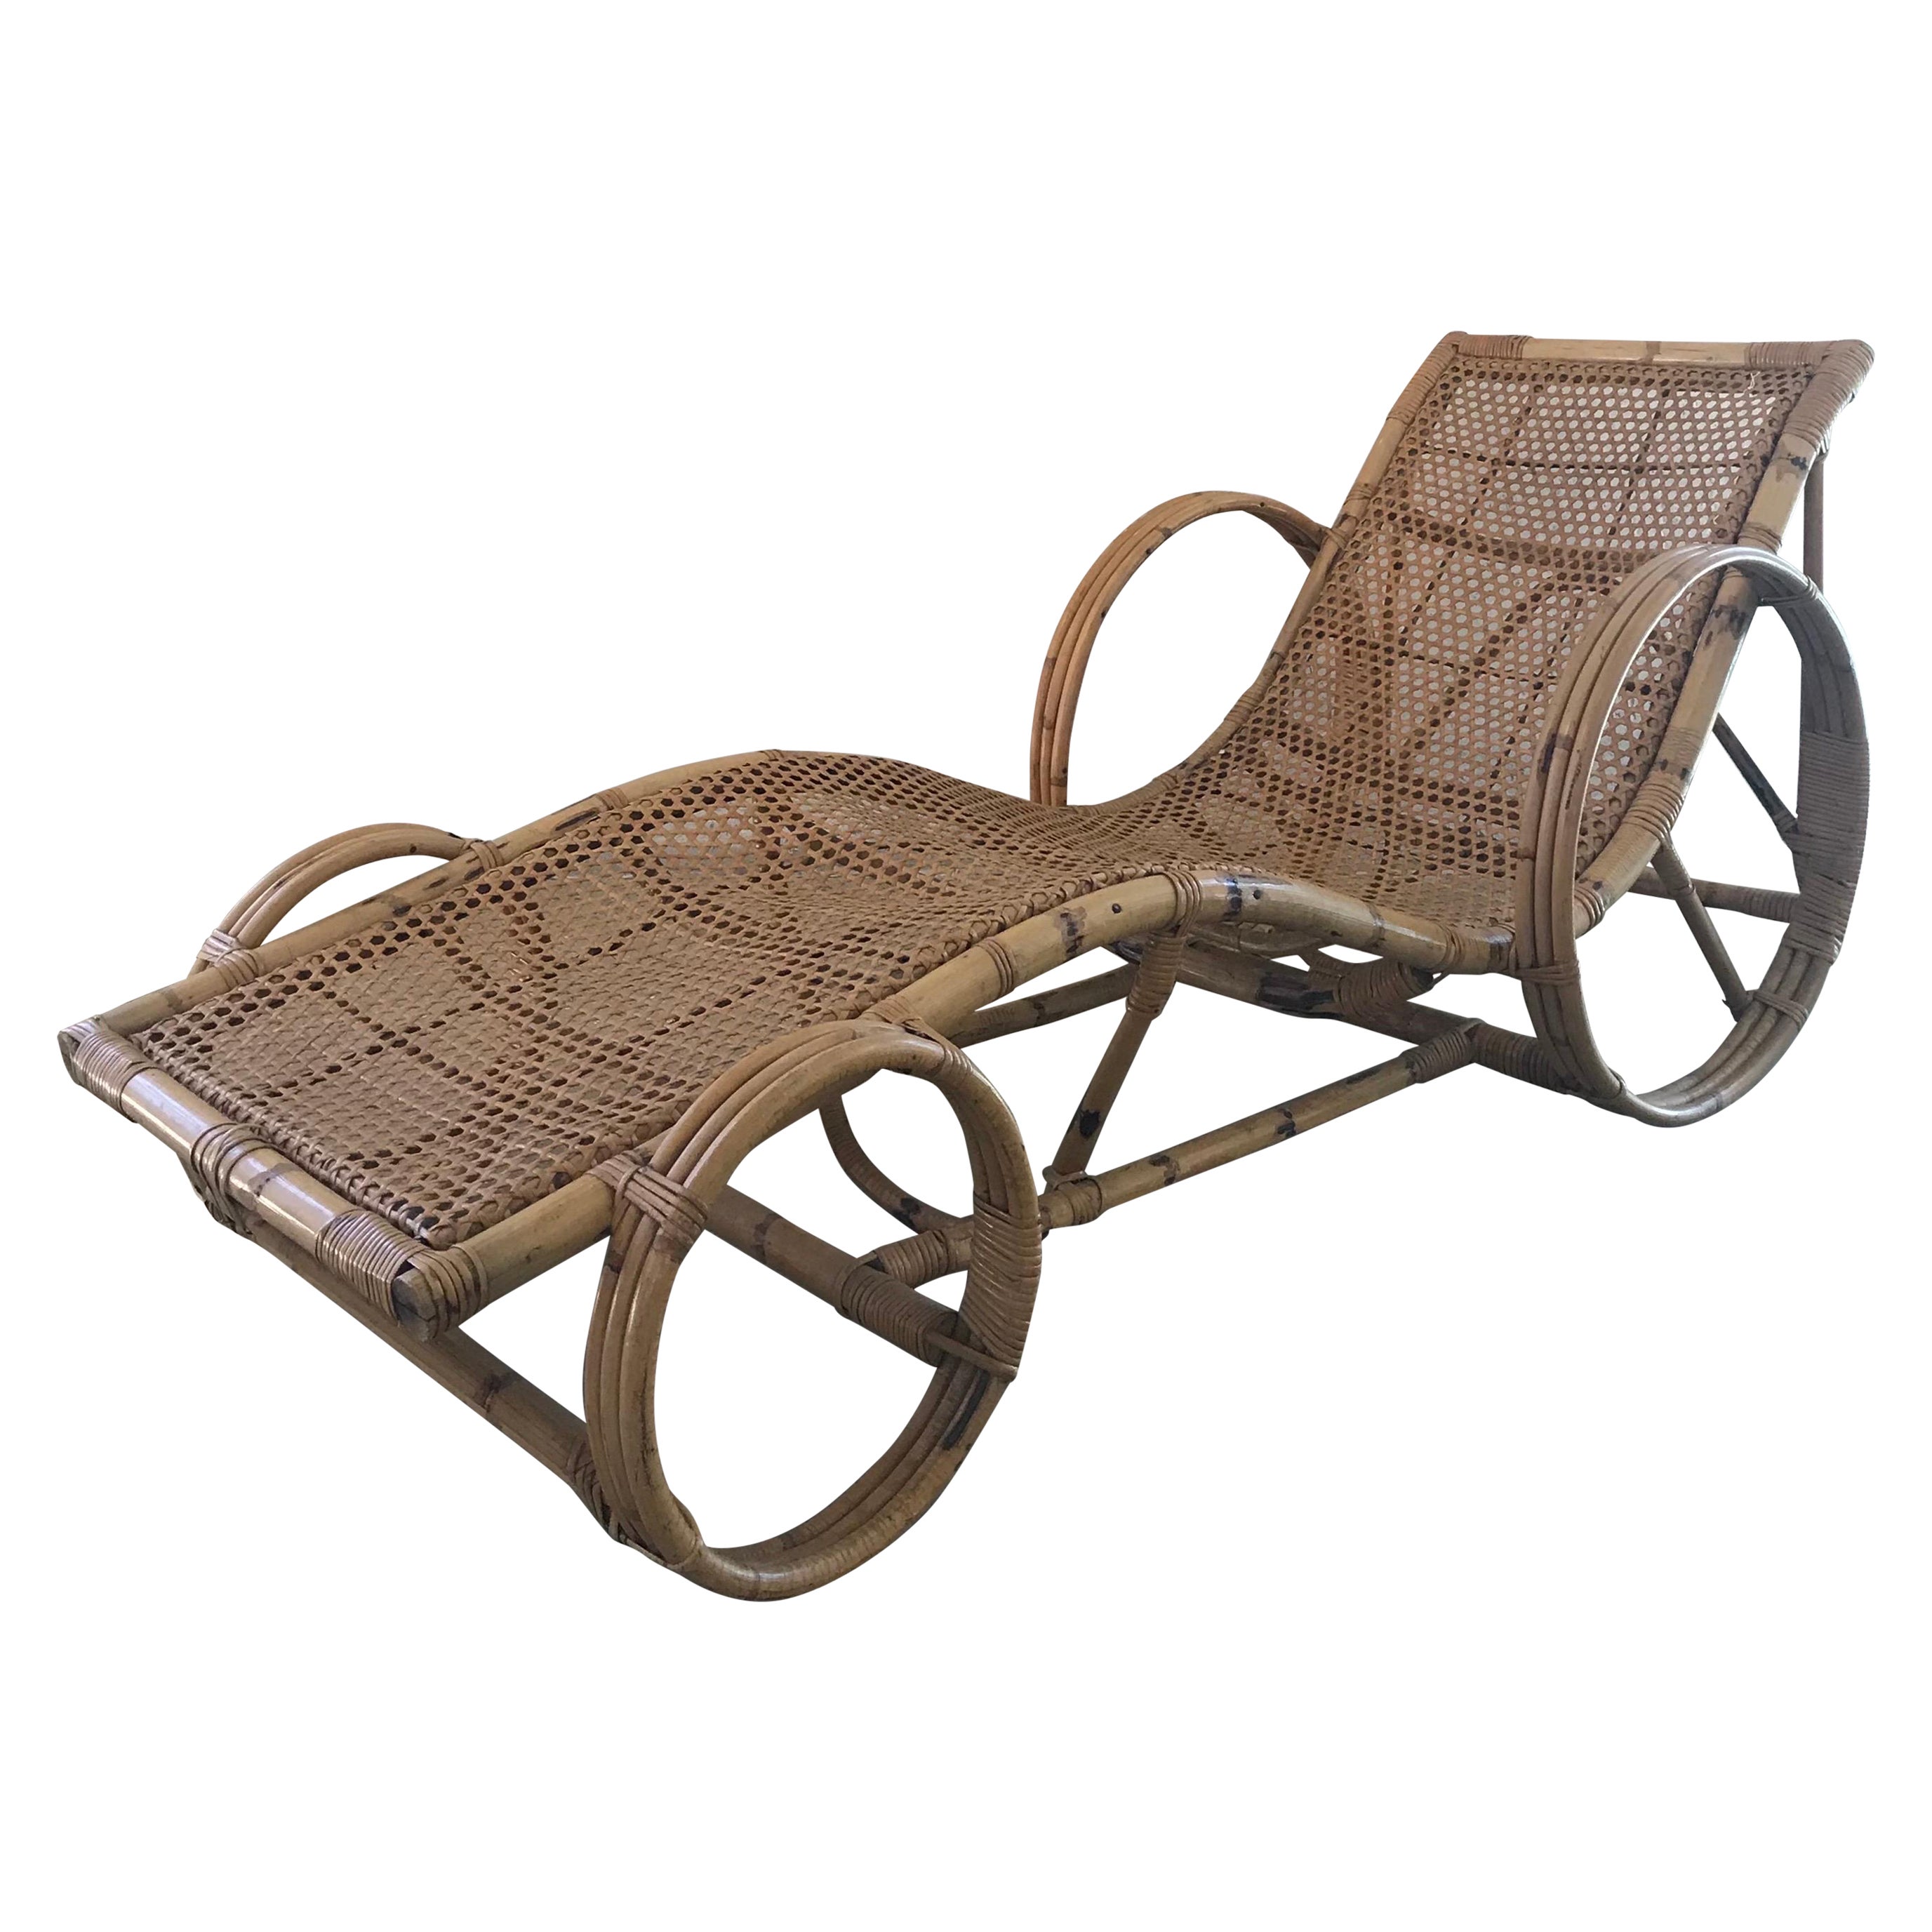 20th Century American Bamboo/Cane Chaise Lounge For Sale